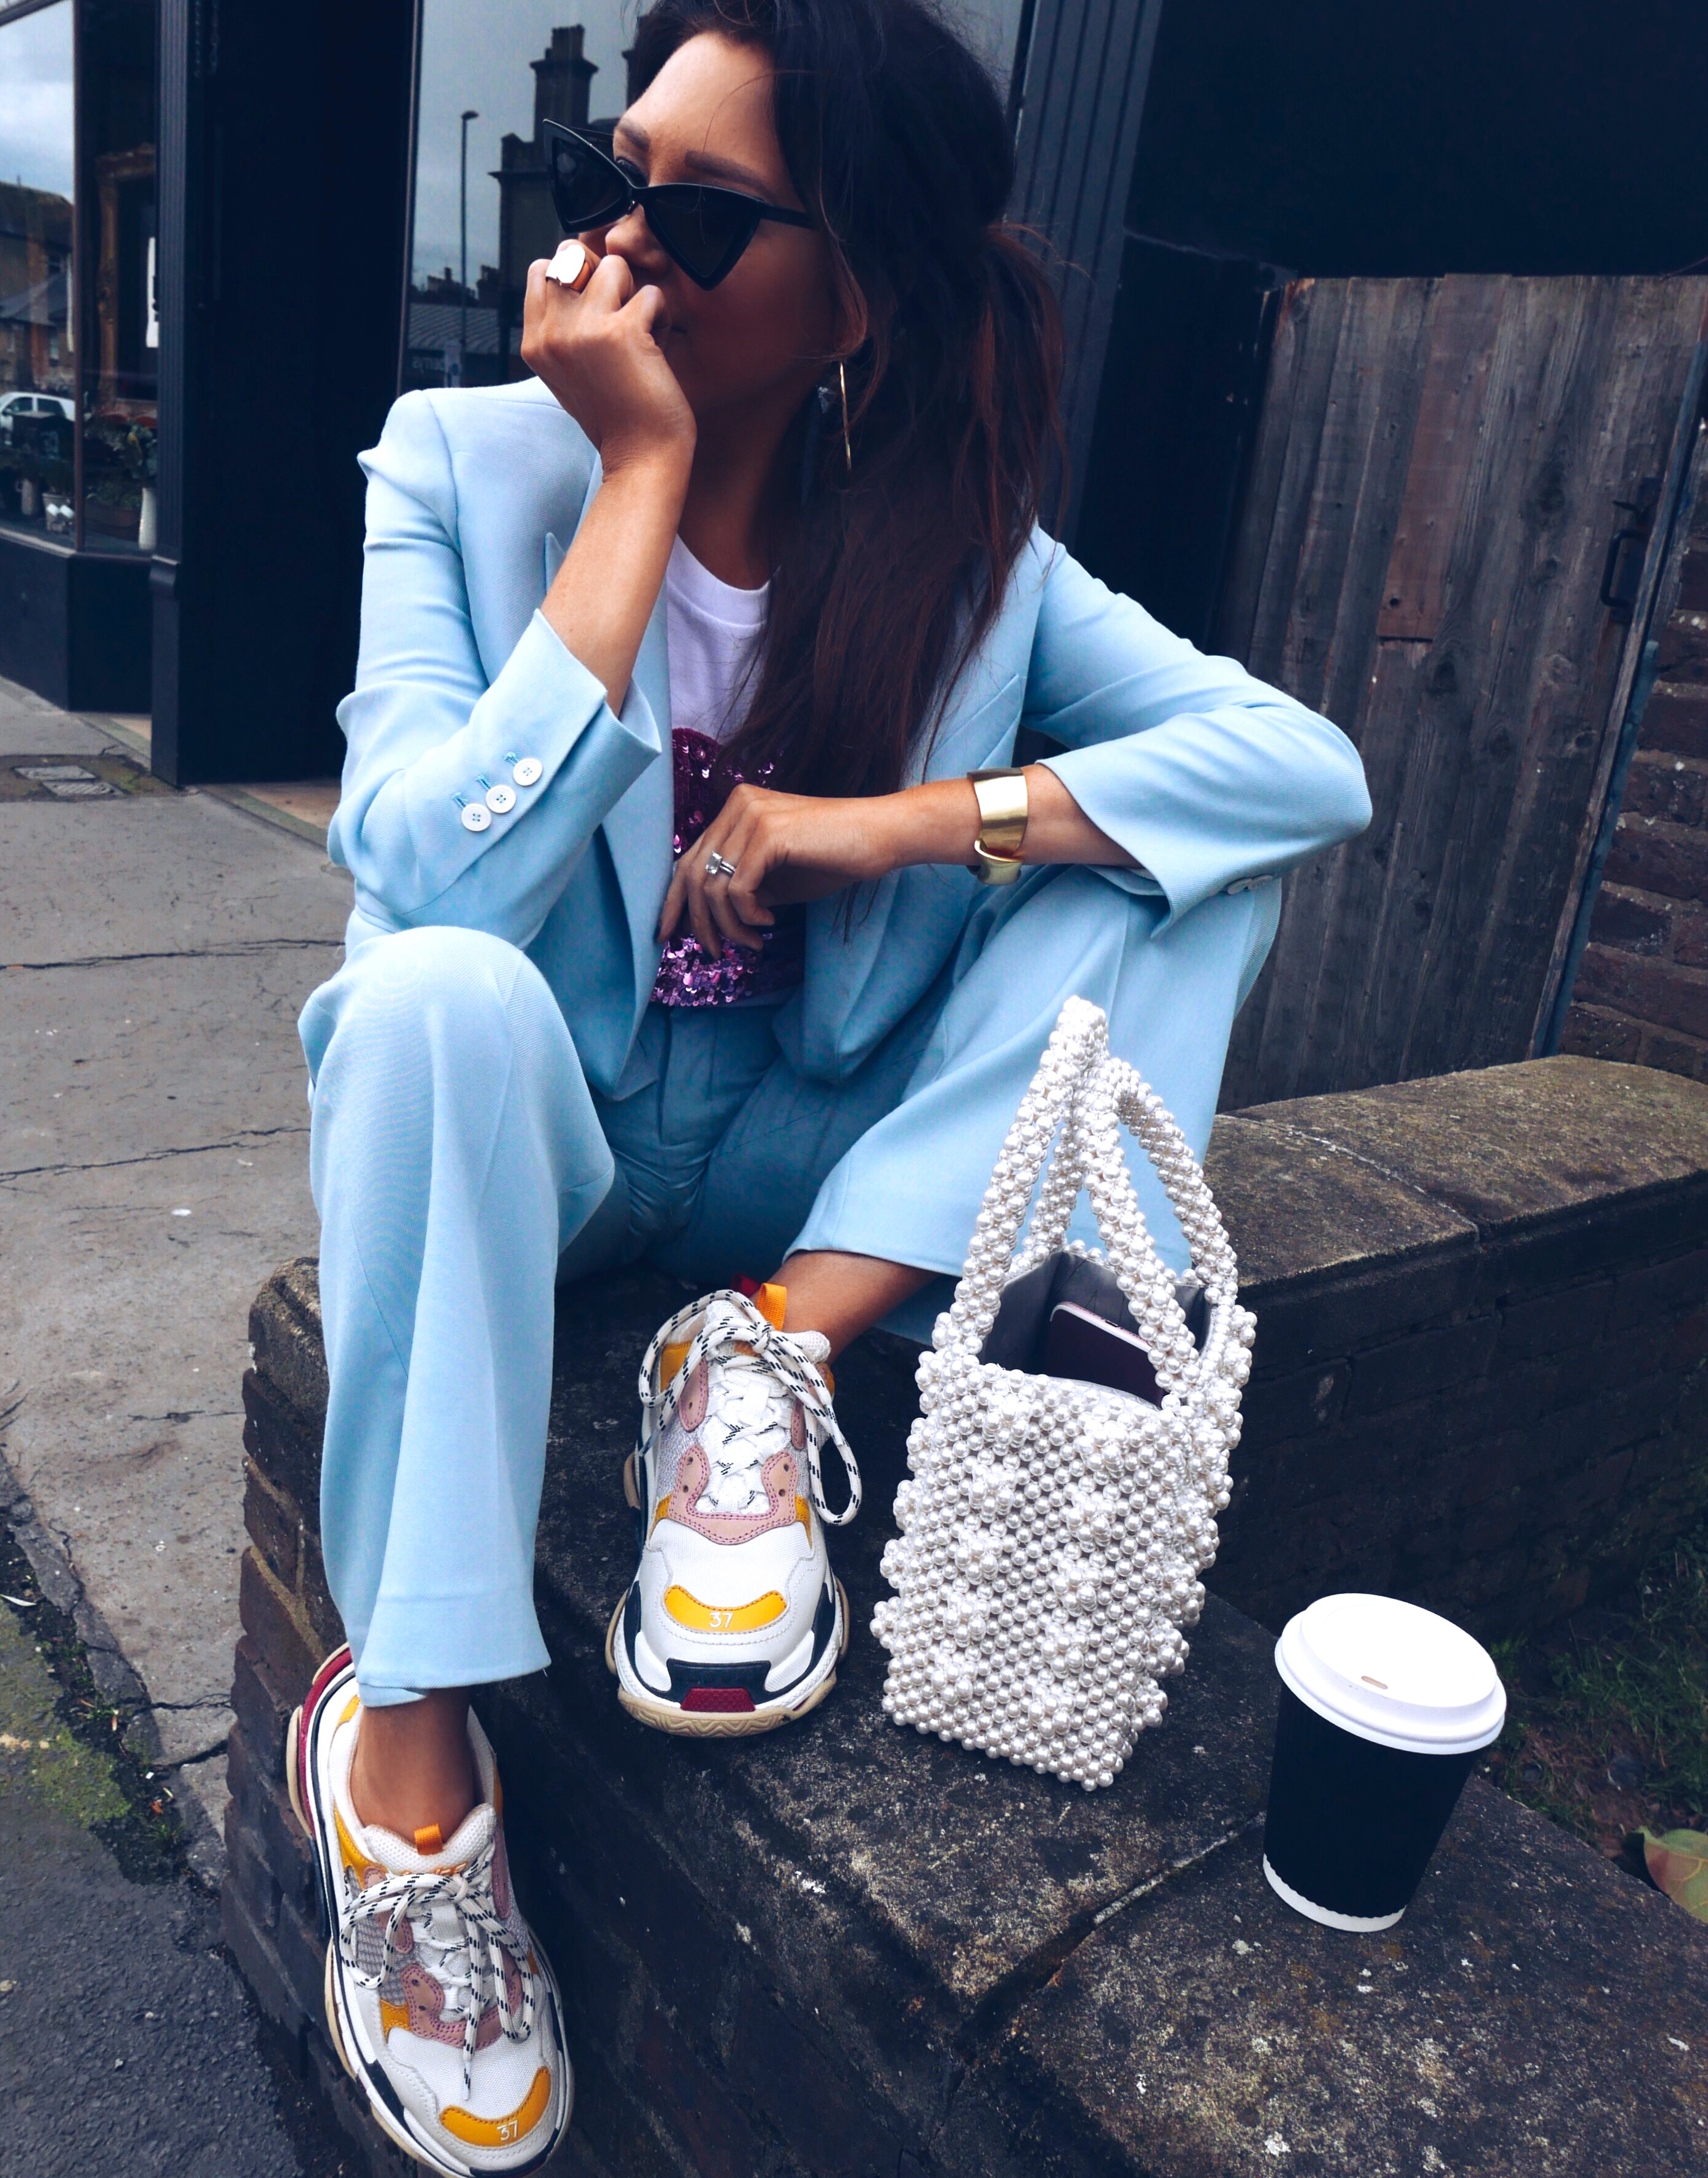 pastel-blue-tailored-trouser-suit-zara-with-balenciaga-triple-s-trainer